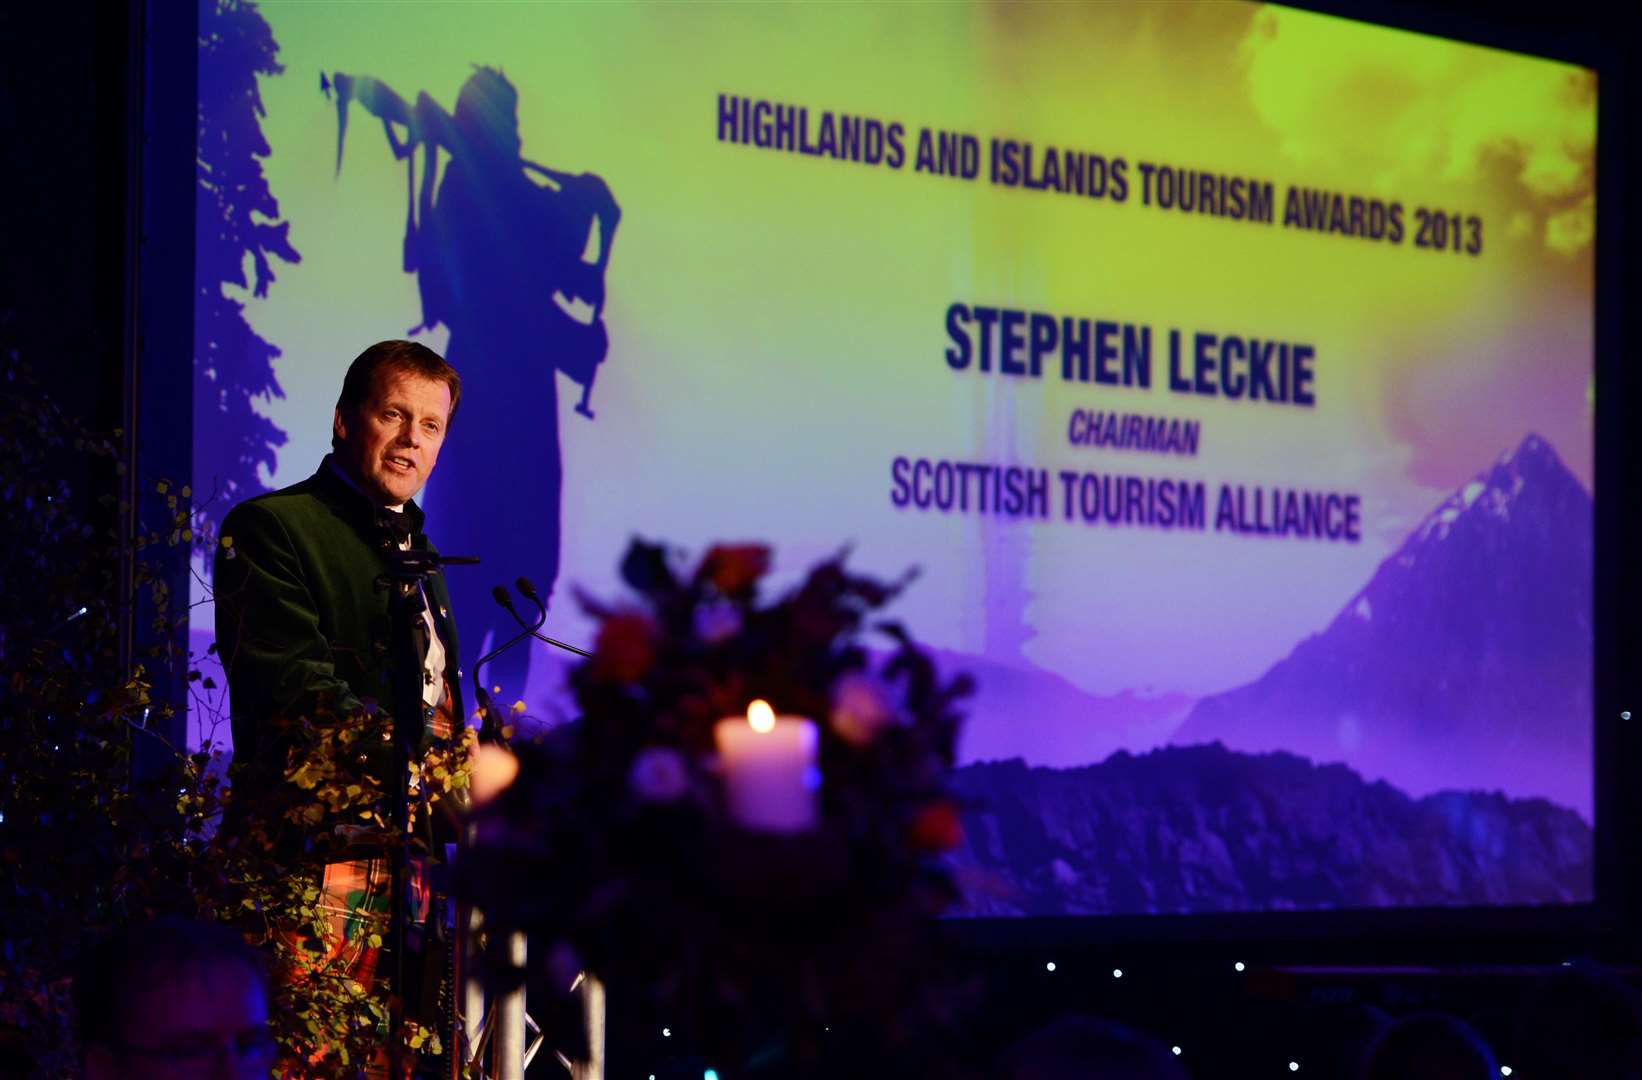 Stephen Leckie at the Highlands and Islands Tourism Awards.